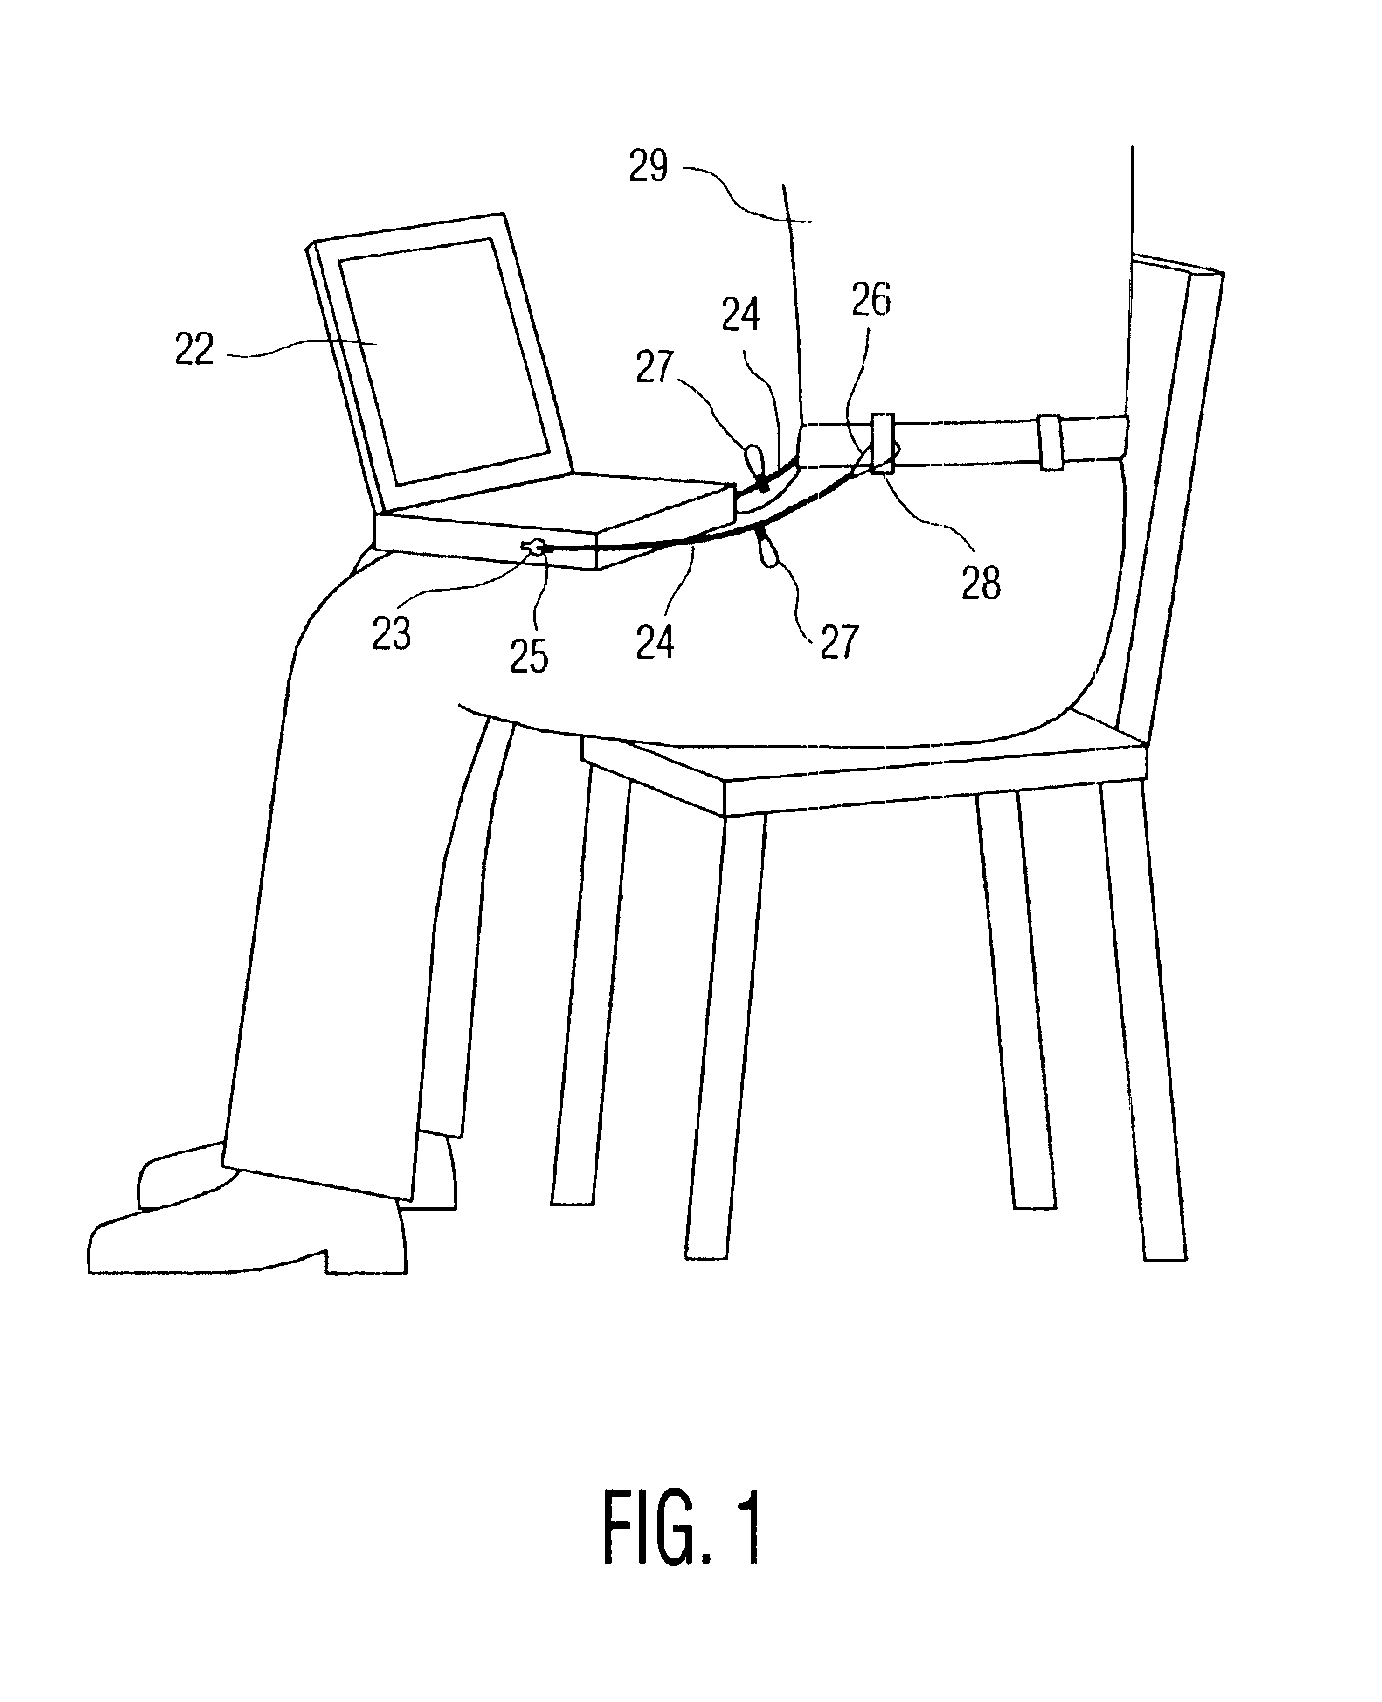 Tether arrangement for portable electronic device, such as a lap-top computer